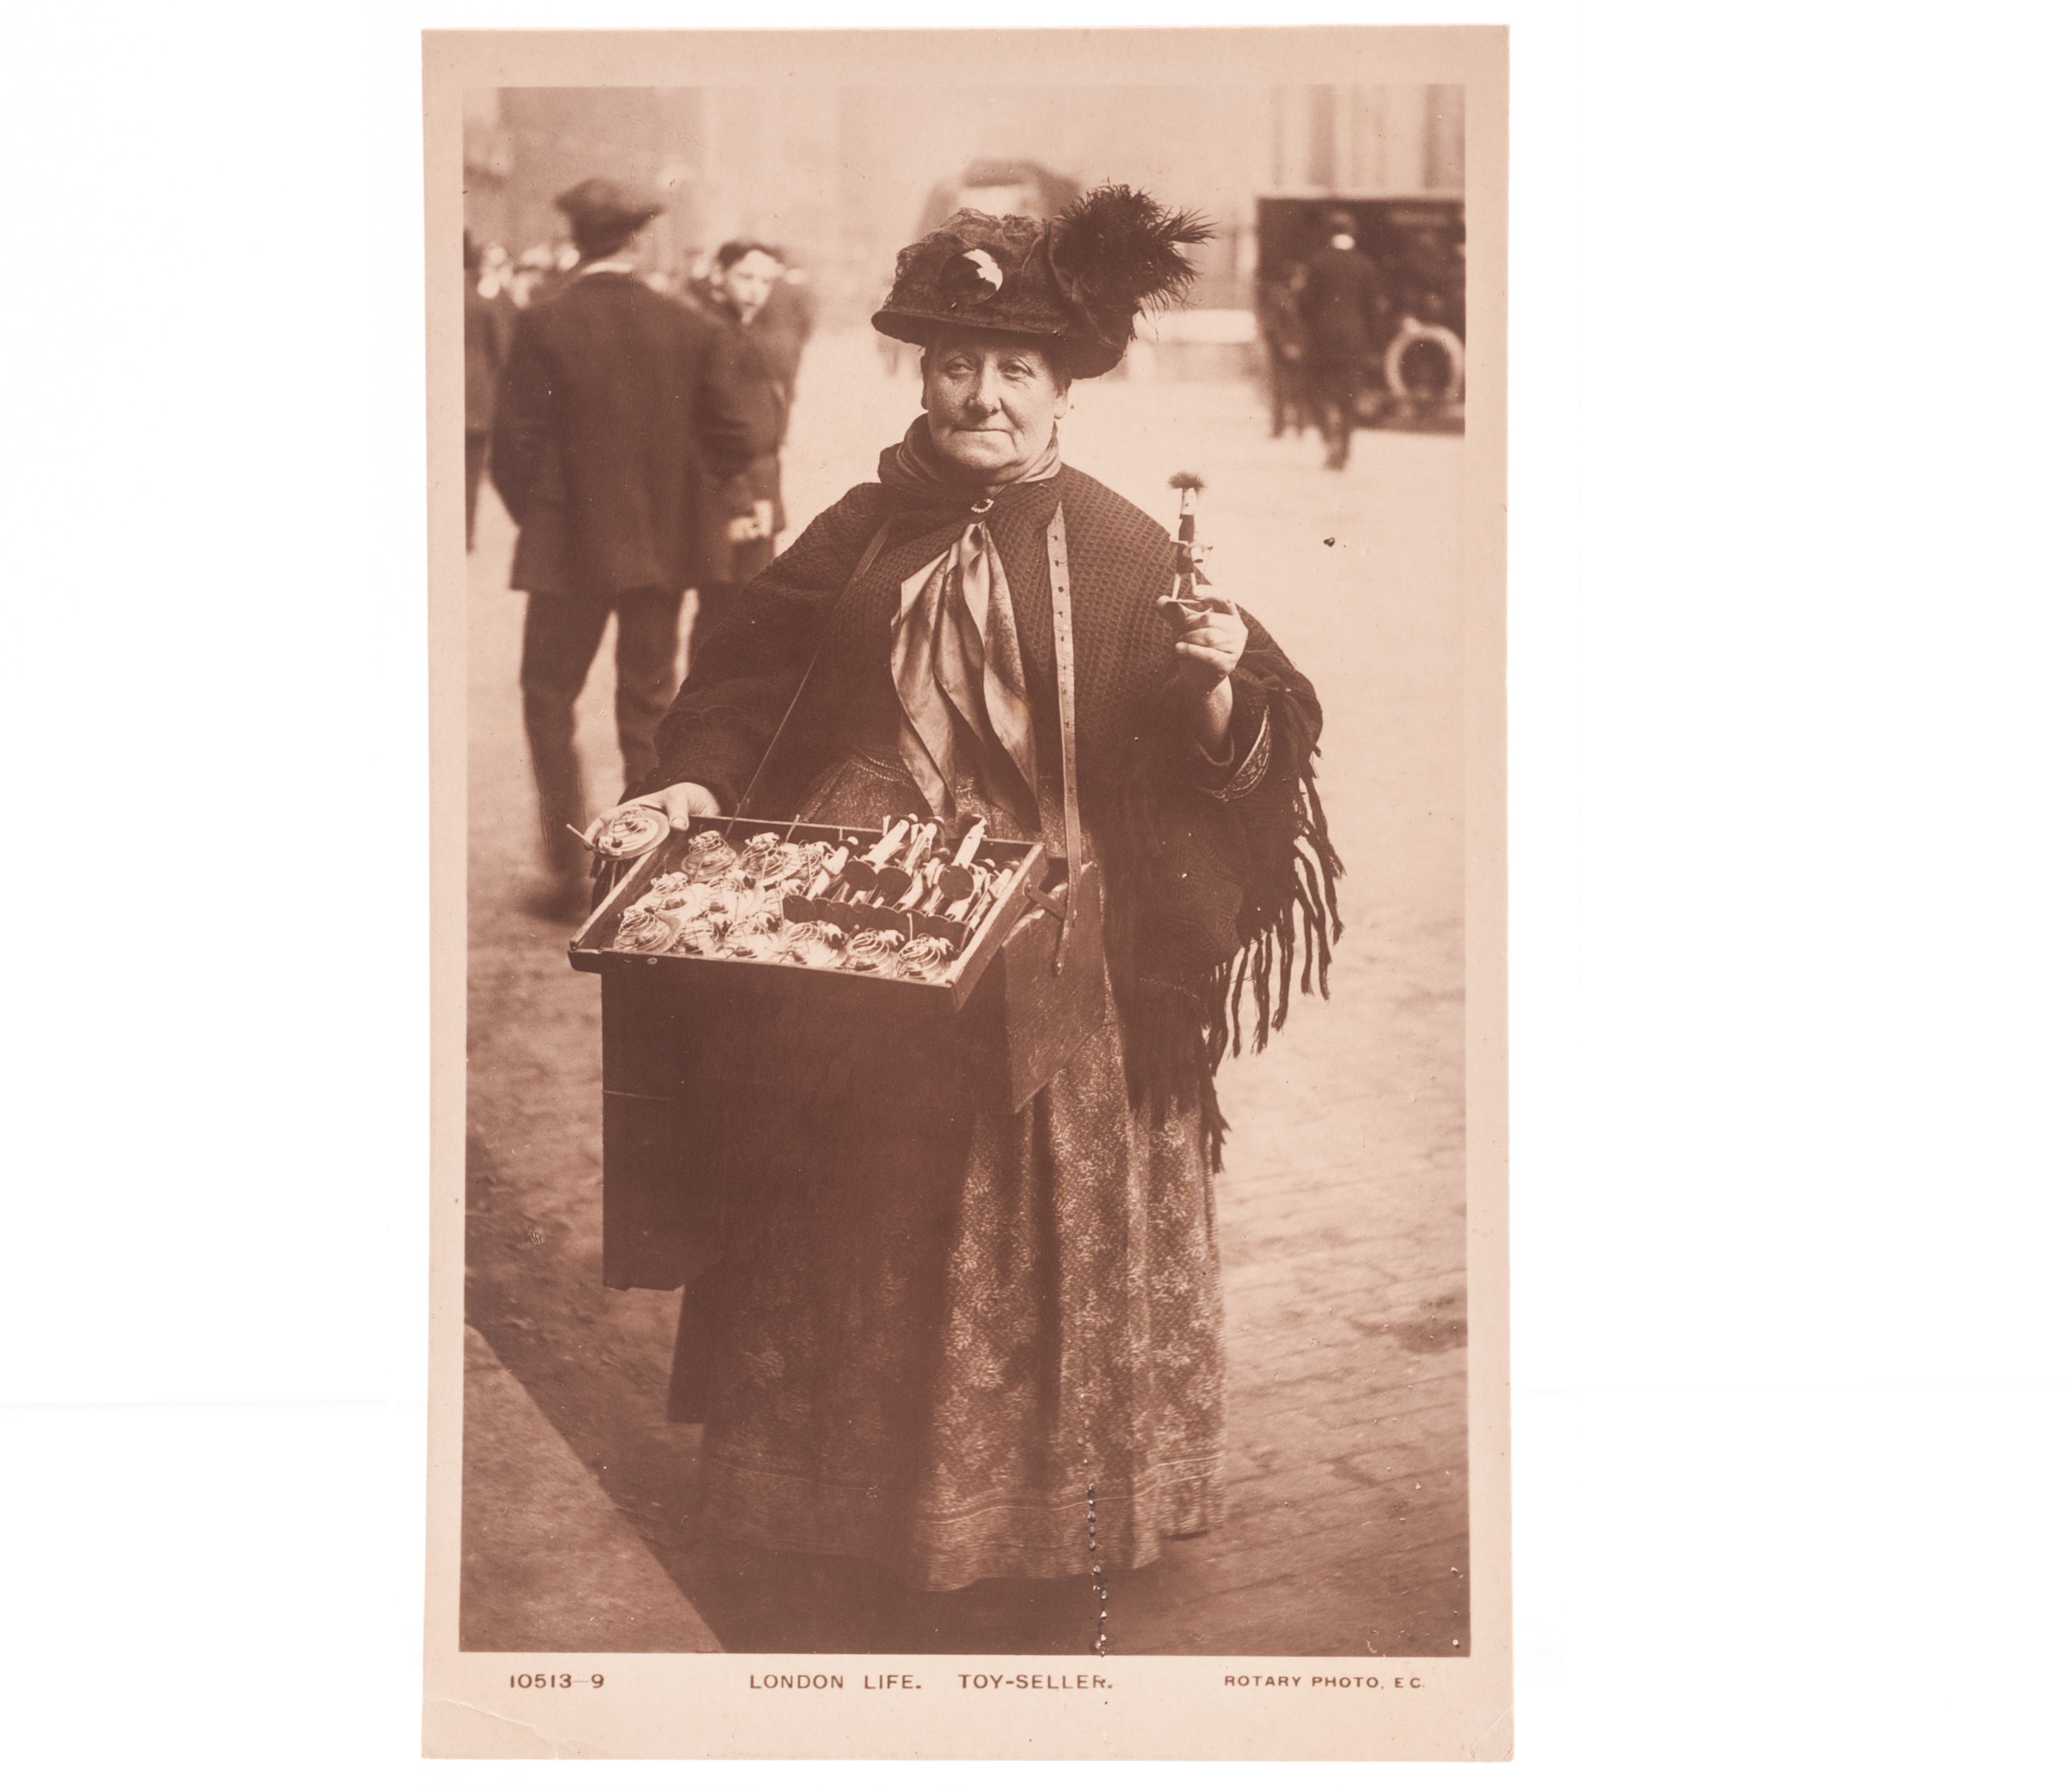 Postcards London Life Series by Rotary, Flower Sellers 10513-18, Toy Sellers (-9), A Woman Pavement